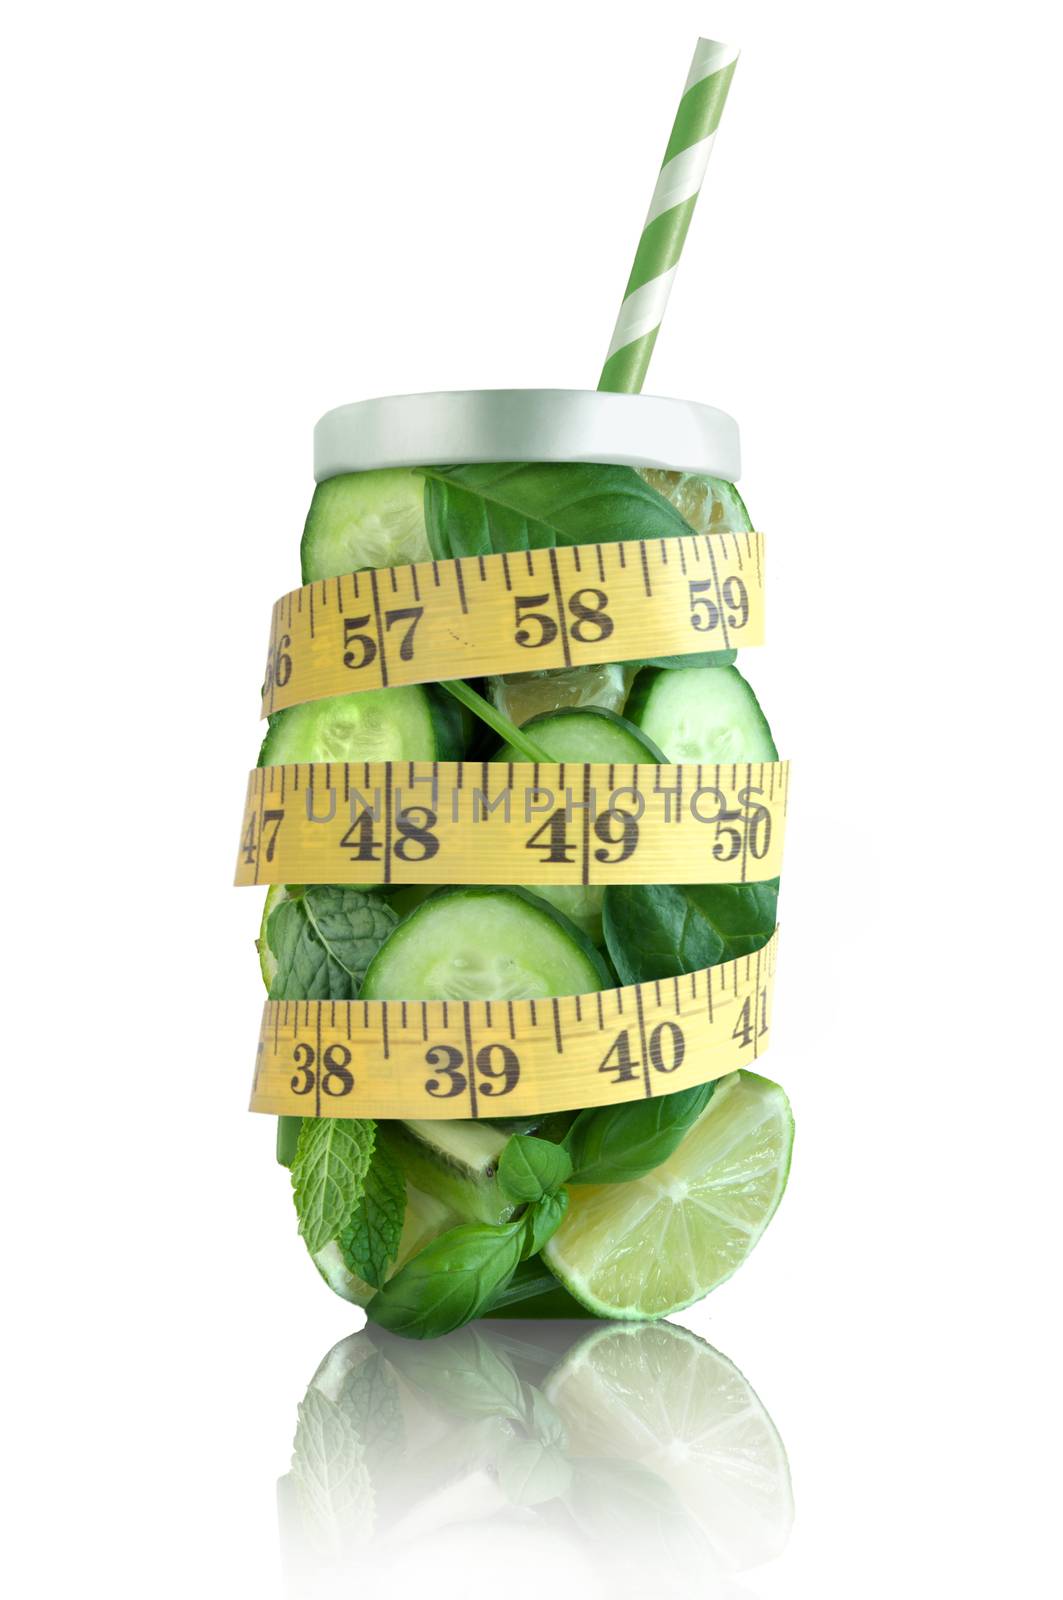 Healthy green fruits and vegetable in the shape of a jar with tape measure 